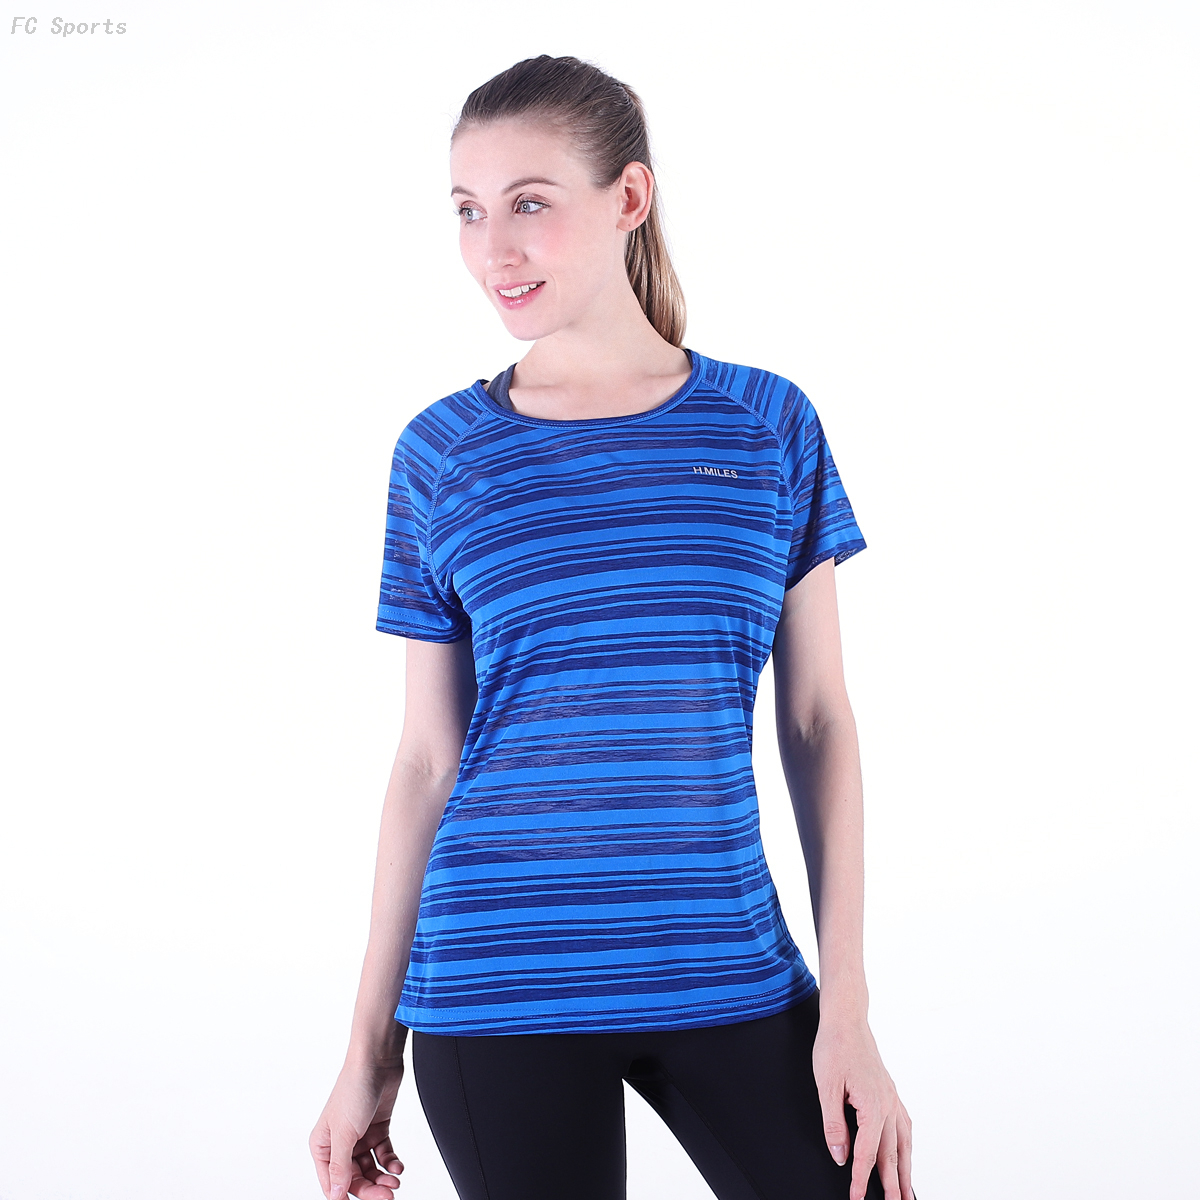 FC Sports Tee shirt Overall Women Slim Breathable Dry Fit Style Fitness Clothes Wholesale 